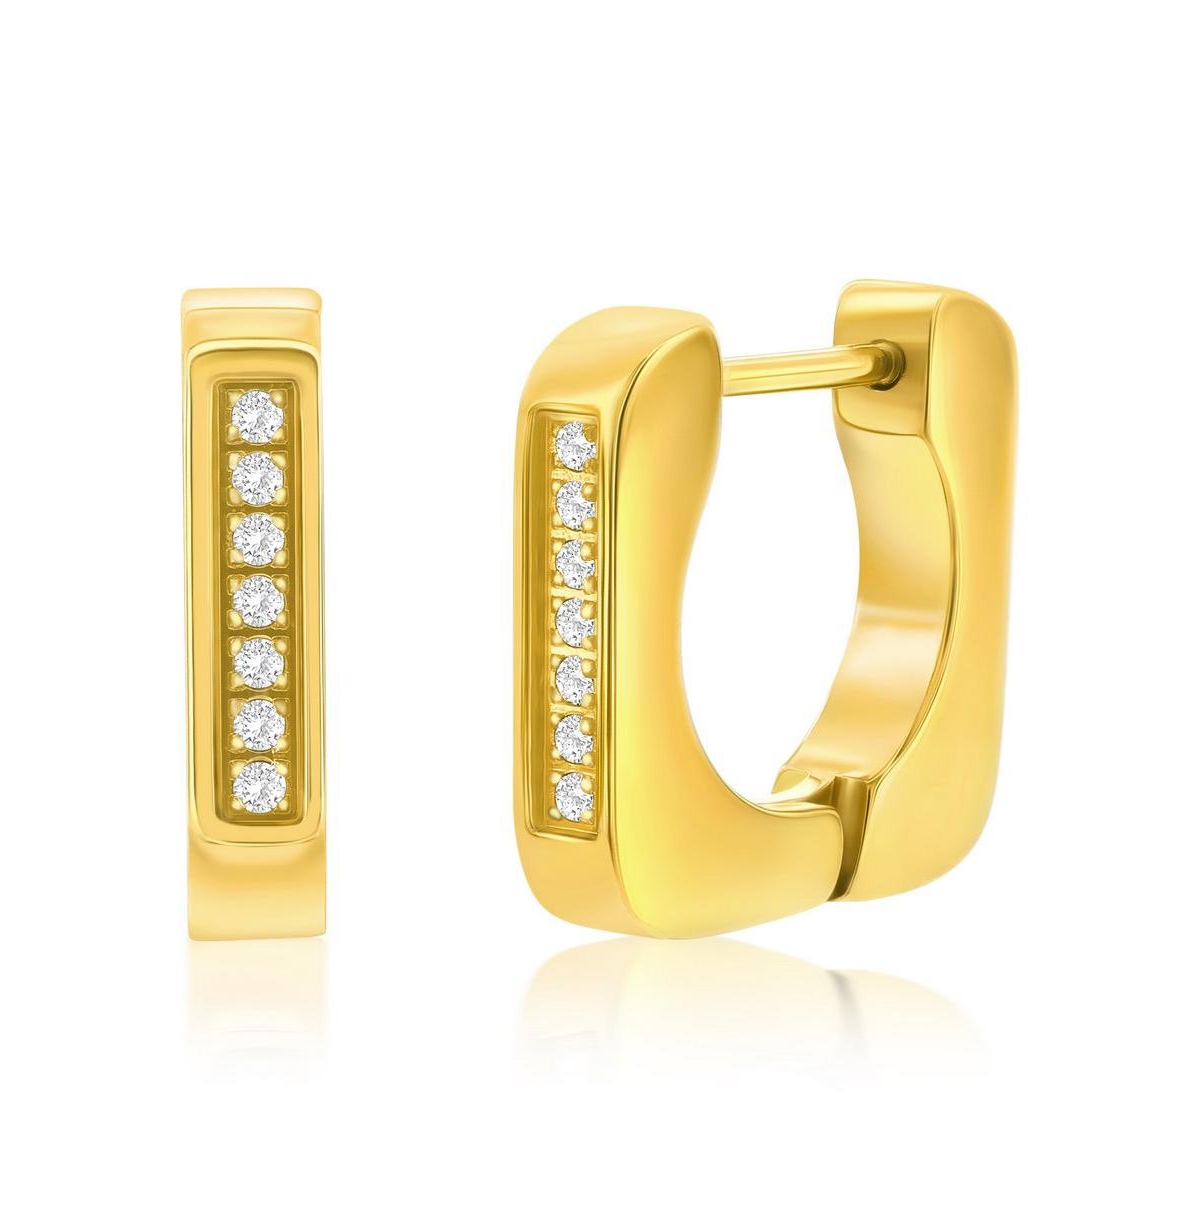 Stainless Steel or Gold Plated over Stainless Steel U-Shaped Cz Huggie Hoop Earrings - Gold